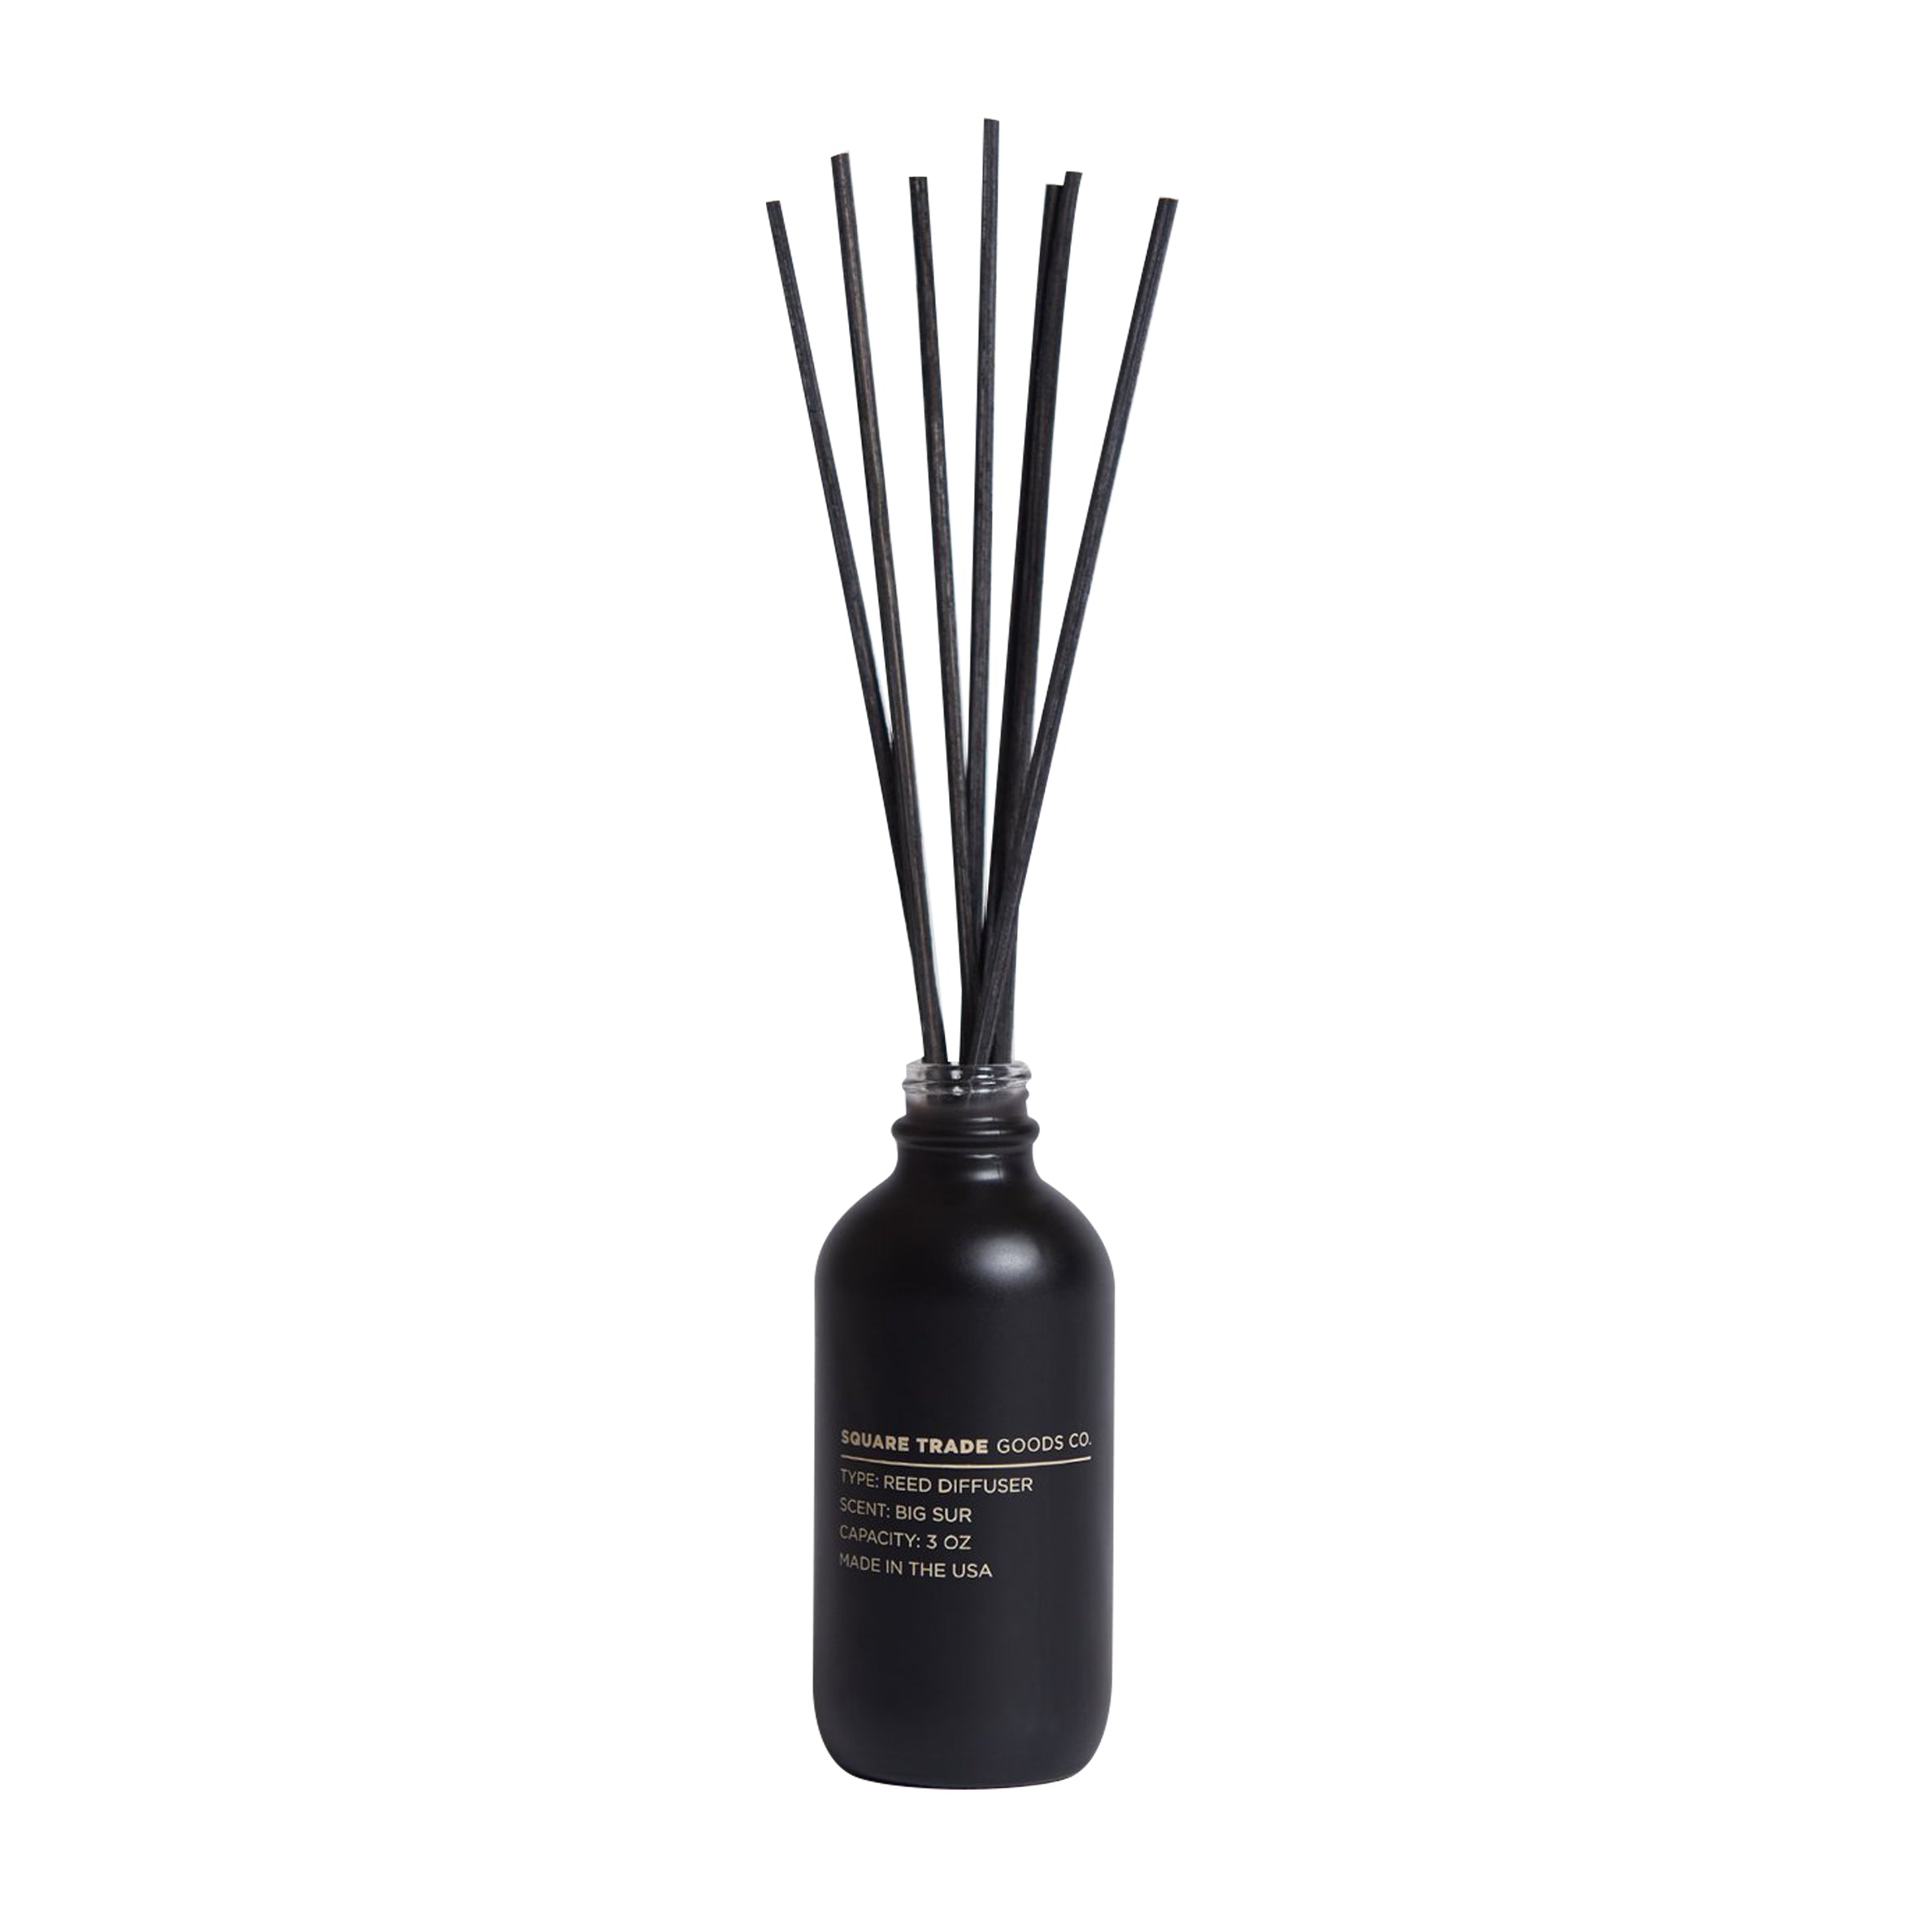 Square Trade Goods Reed Diffuser